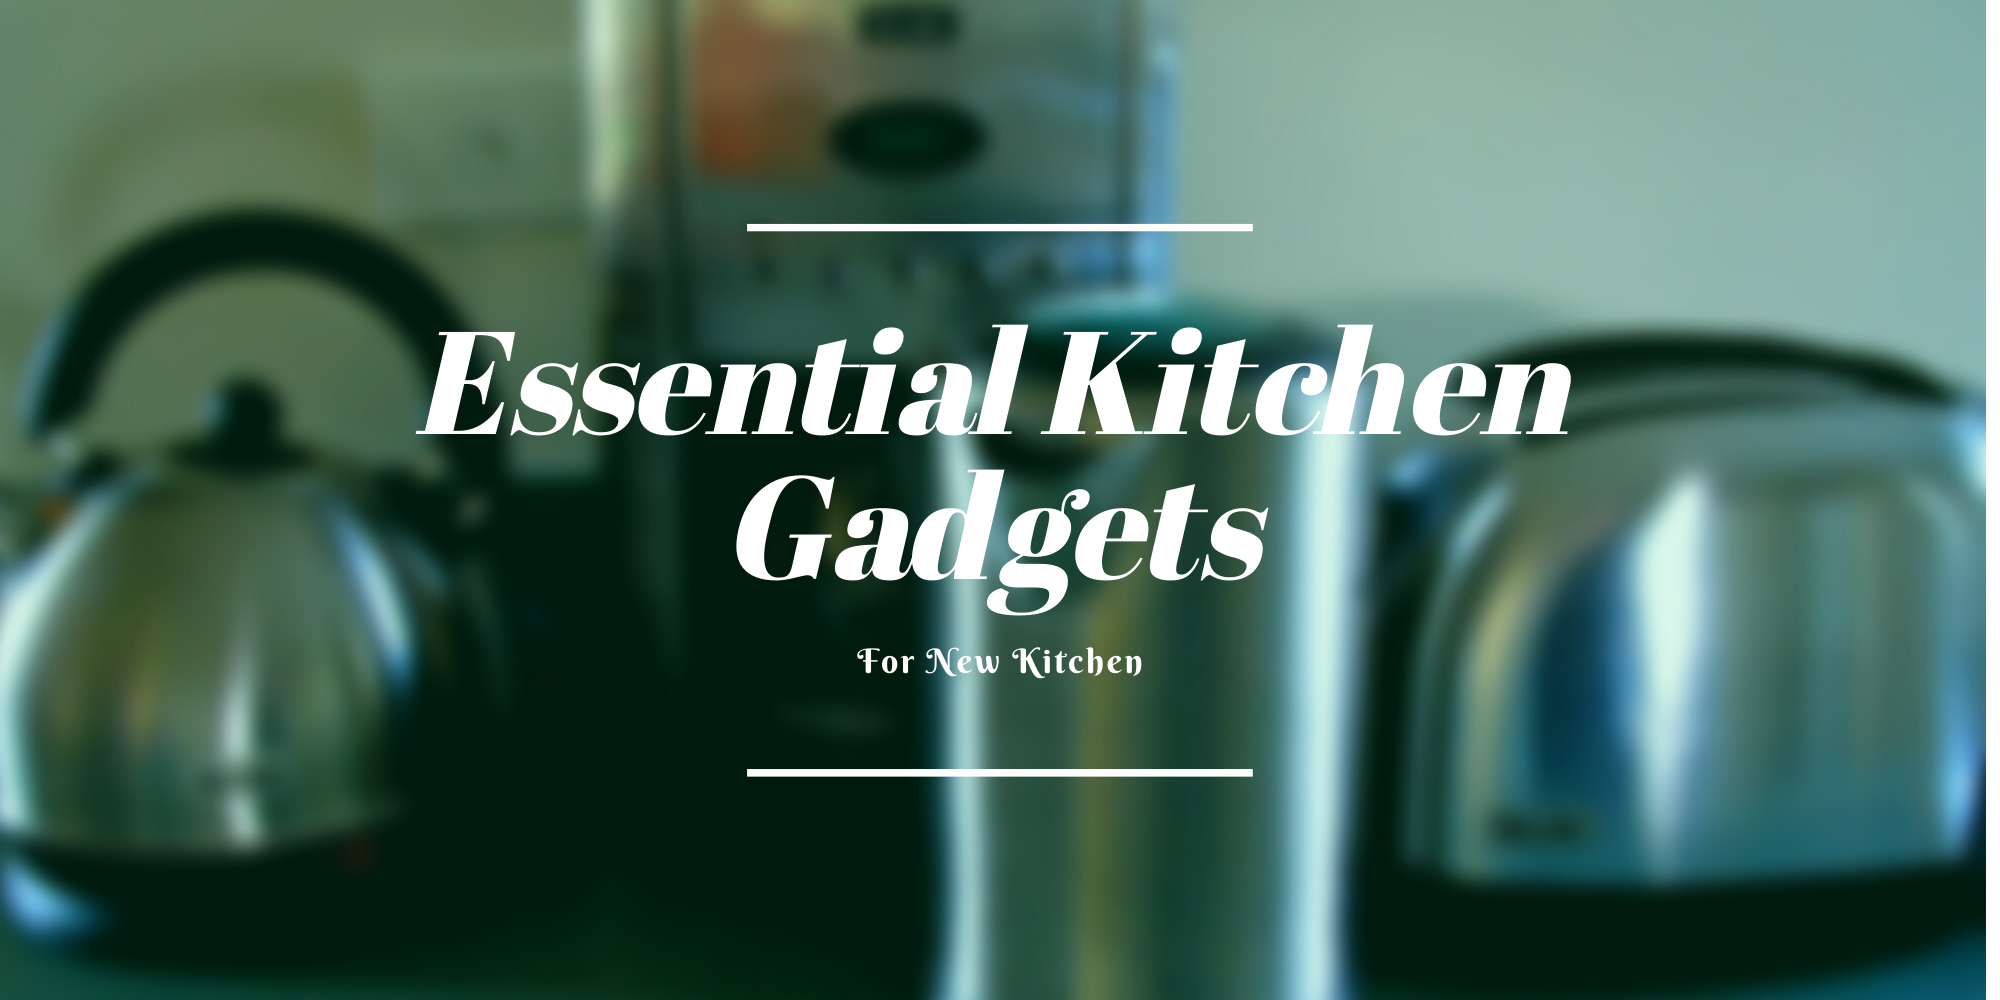 12 Essentials Gadgets Should Have in Your New Kitchen